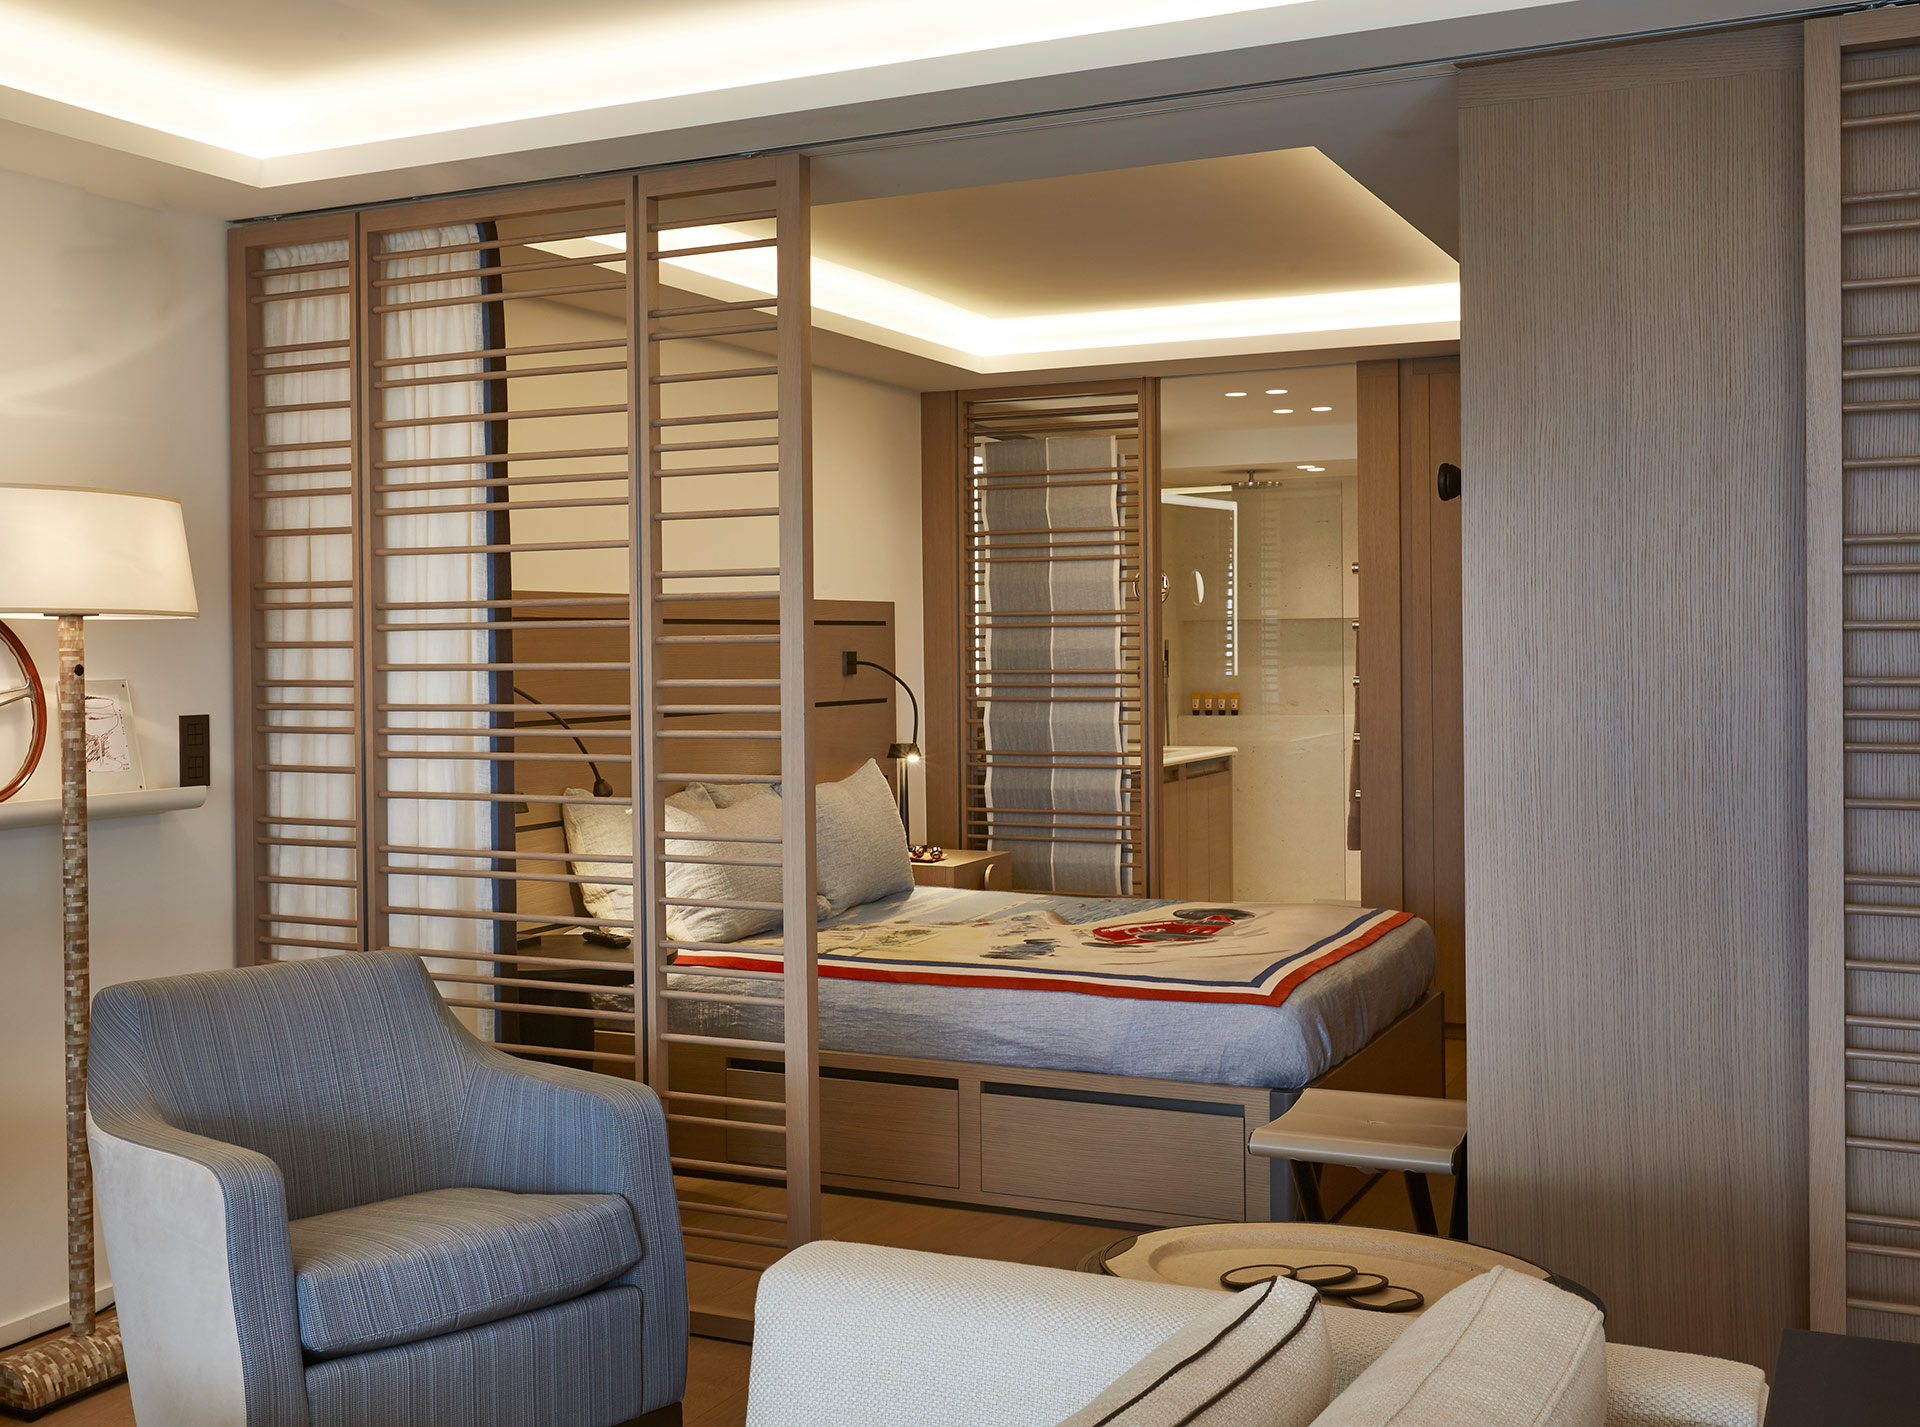 Bedroom of a private residence in Montecarlo furnished with Promemoria | Promemoria